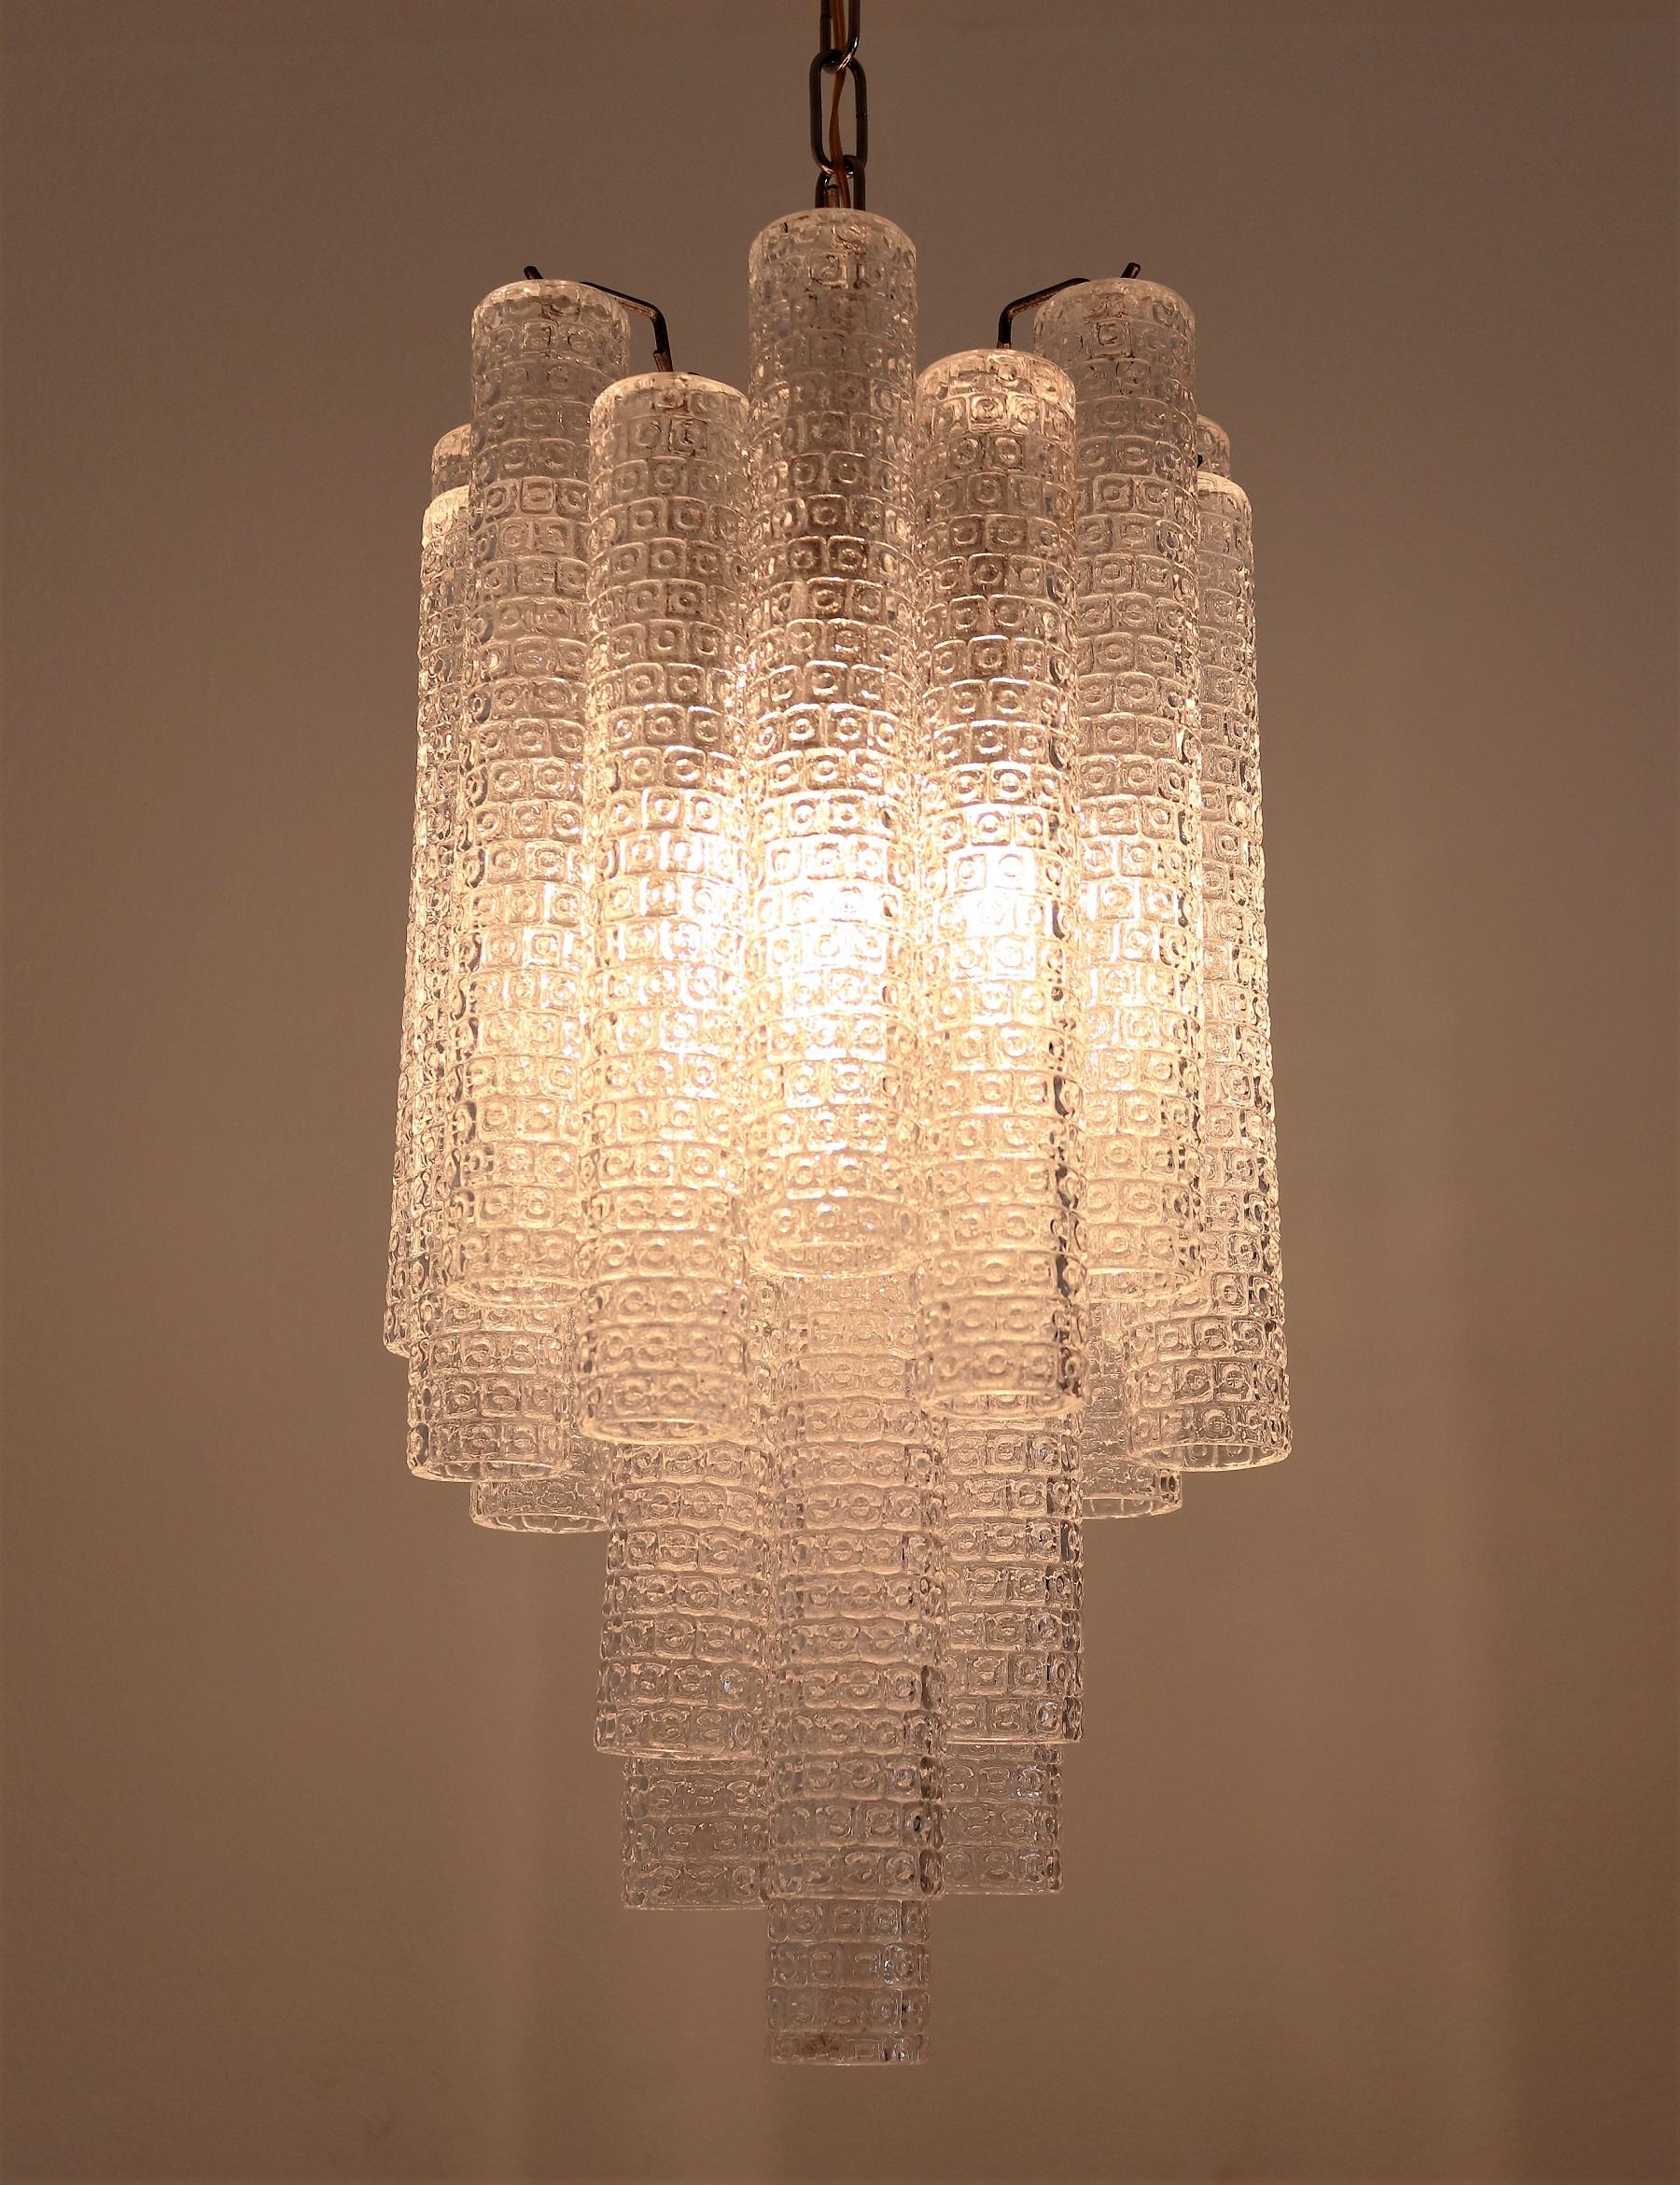 A gorgeous original vintage modernistic chandelier, produced circa 1960s-1970s in Italy by Venini.
Surrounded by 21 pcs. Staggered textured glass tube prisms on curvy hooks, typical for Venini, suspended from a chrome frame.
Requires 3 standard